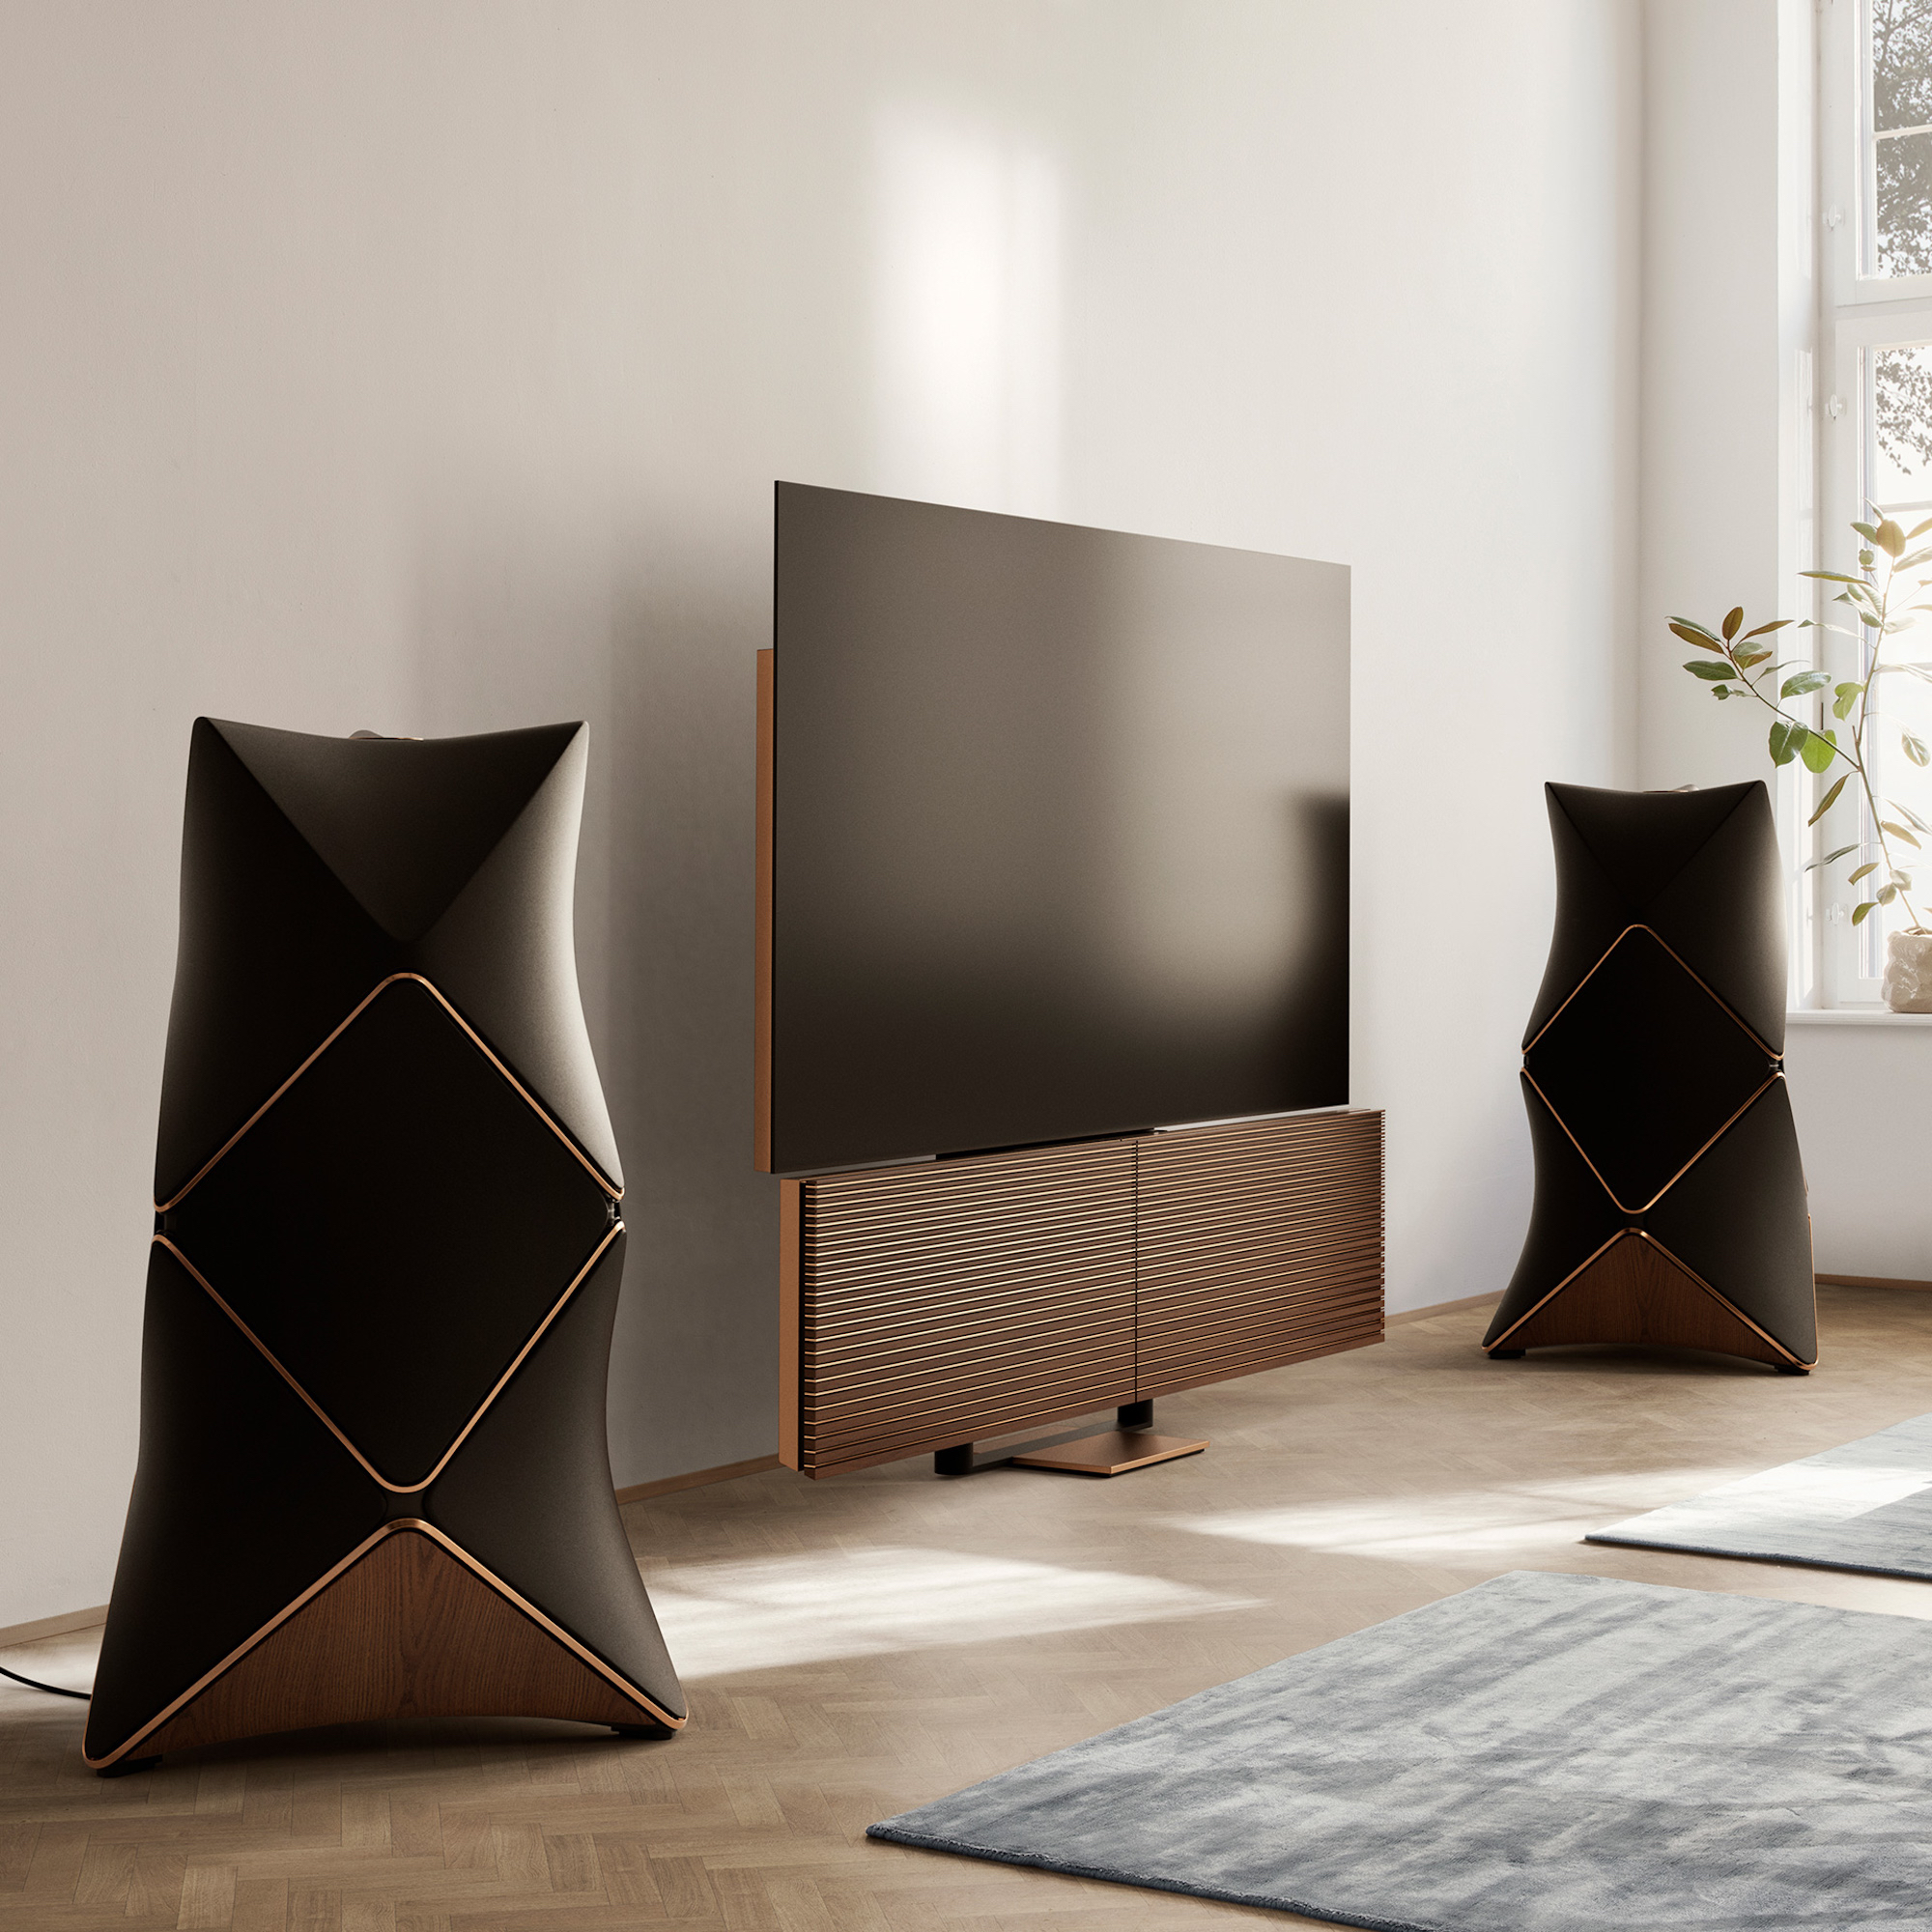 B&O BeoVision with External Speakers